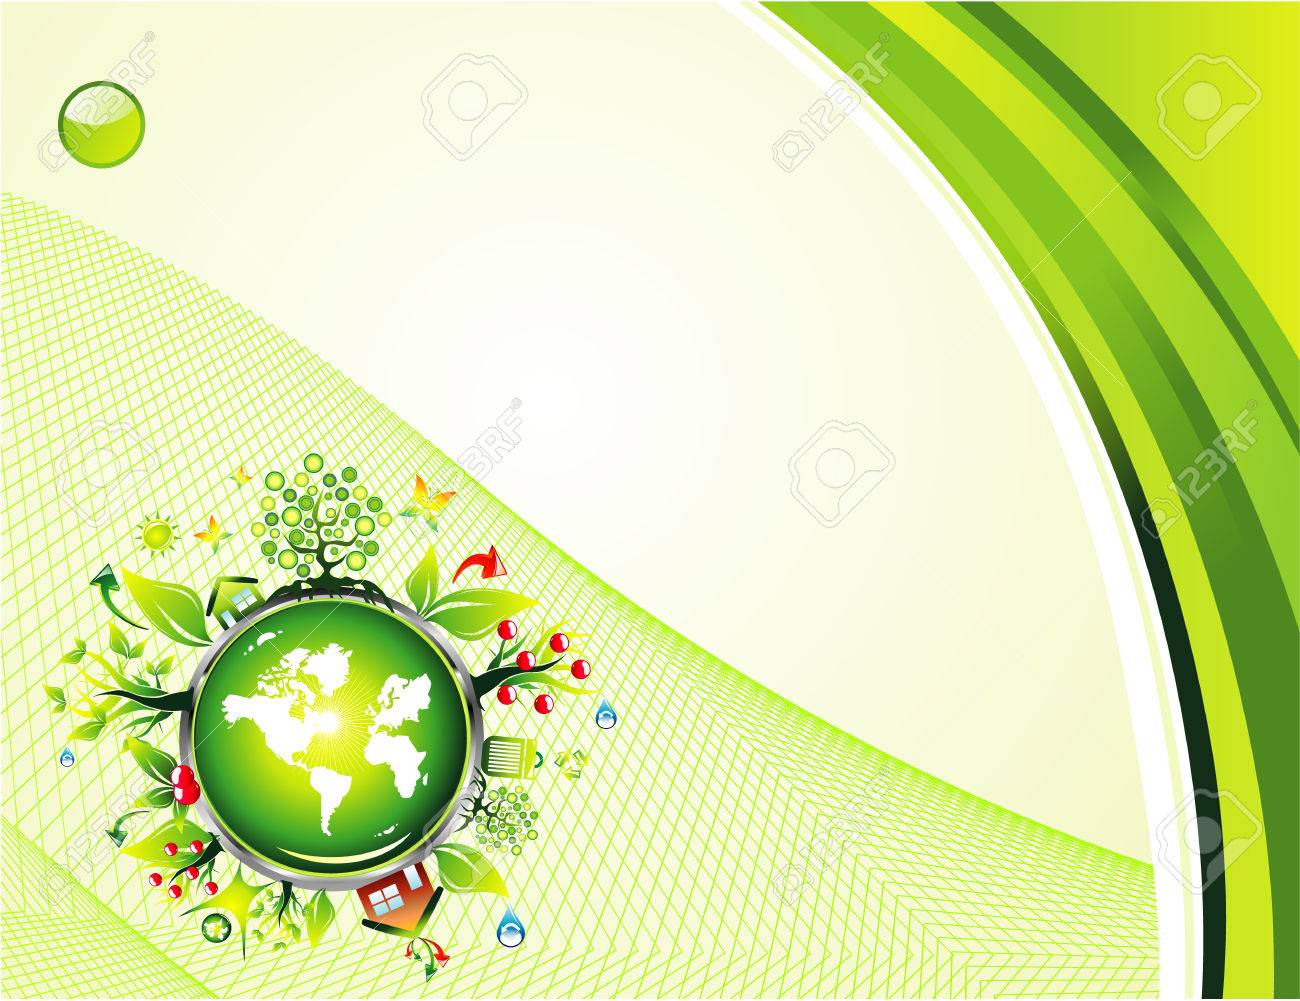 Environment Safety Background Template Royalty Cliparts